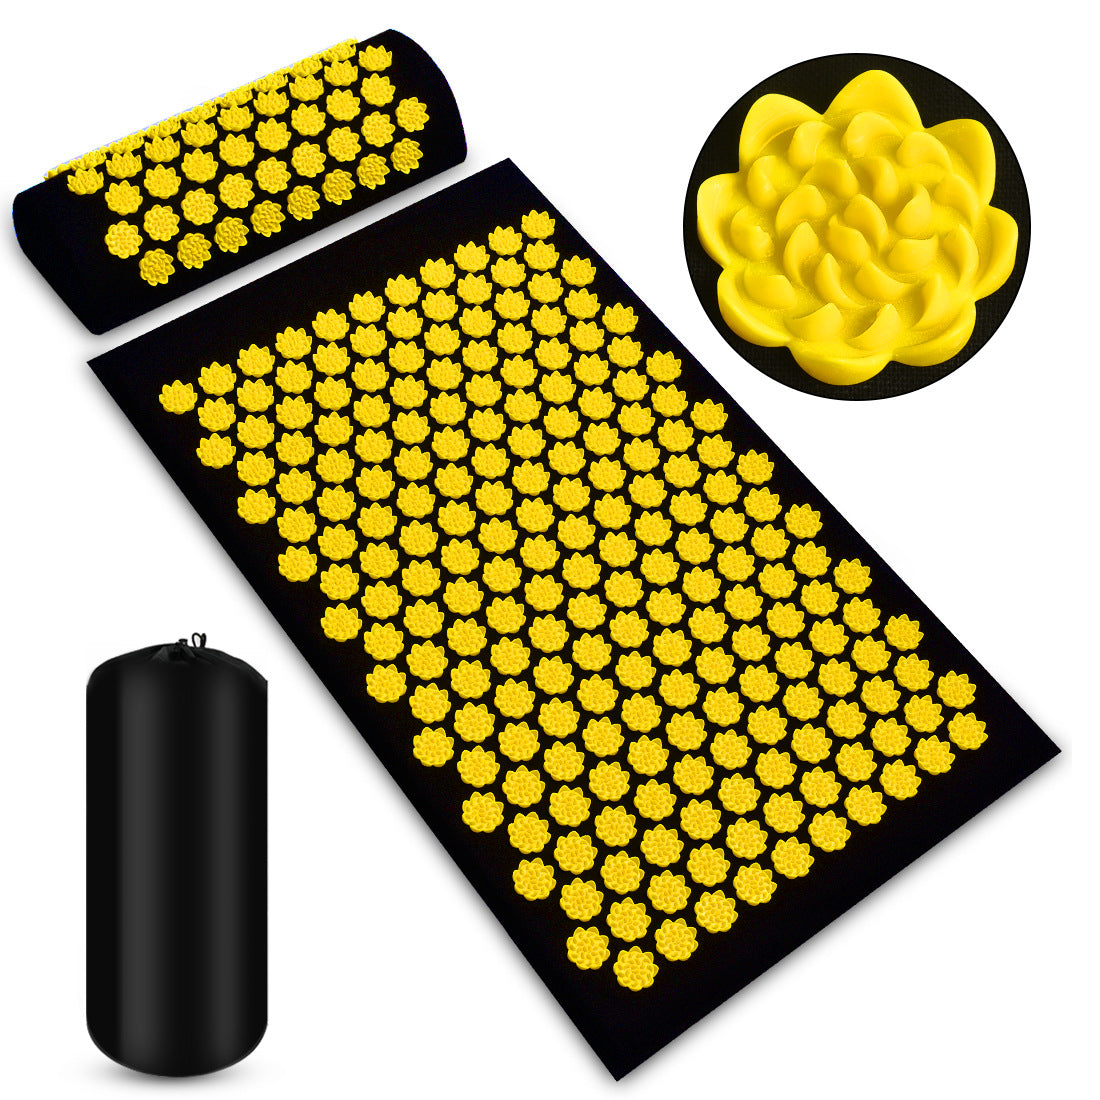 black Acupressure Mat with gentle yellow lotus, set comes with body mat, neck pillow, carrying bag - pain gates theory, pain relief, acupressure - home office health